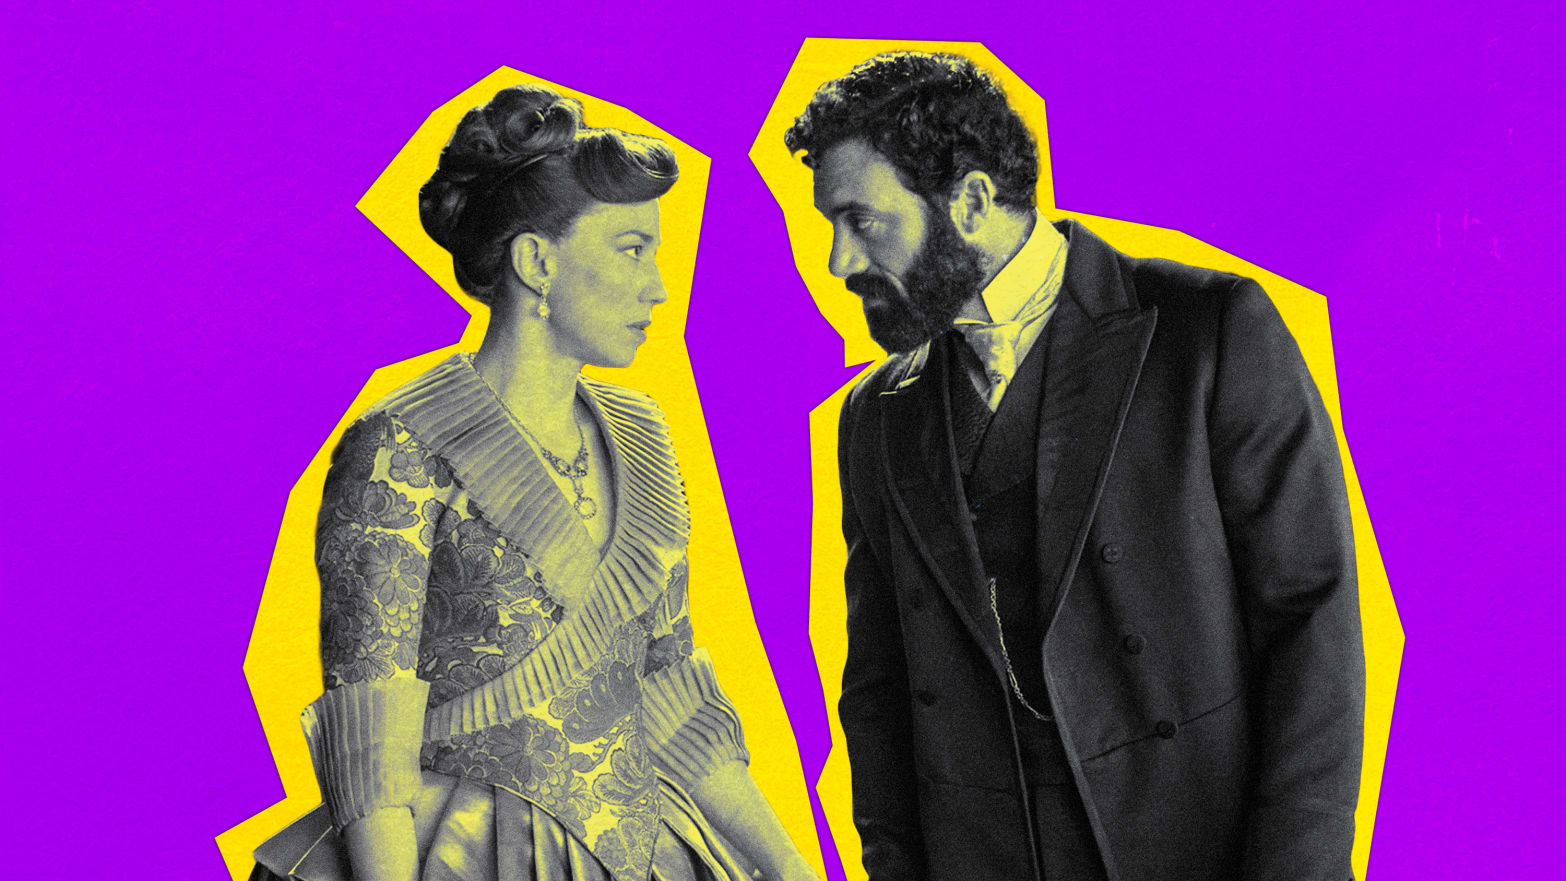 A photo illustration of Carrie Coon and Morgan Spector in The Gilded Age.